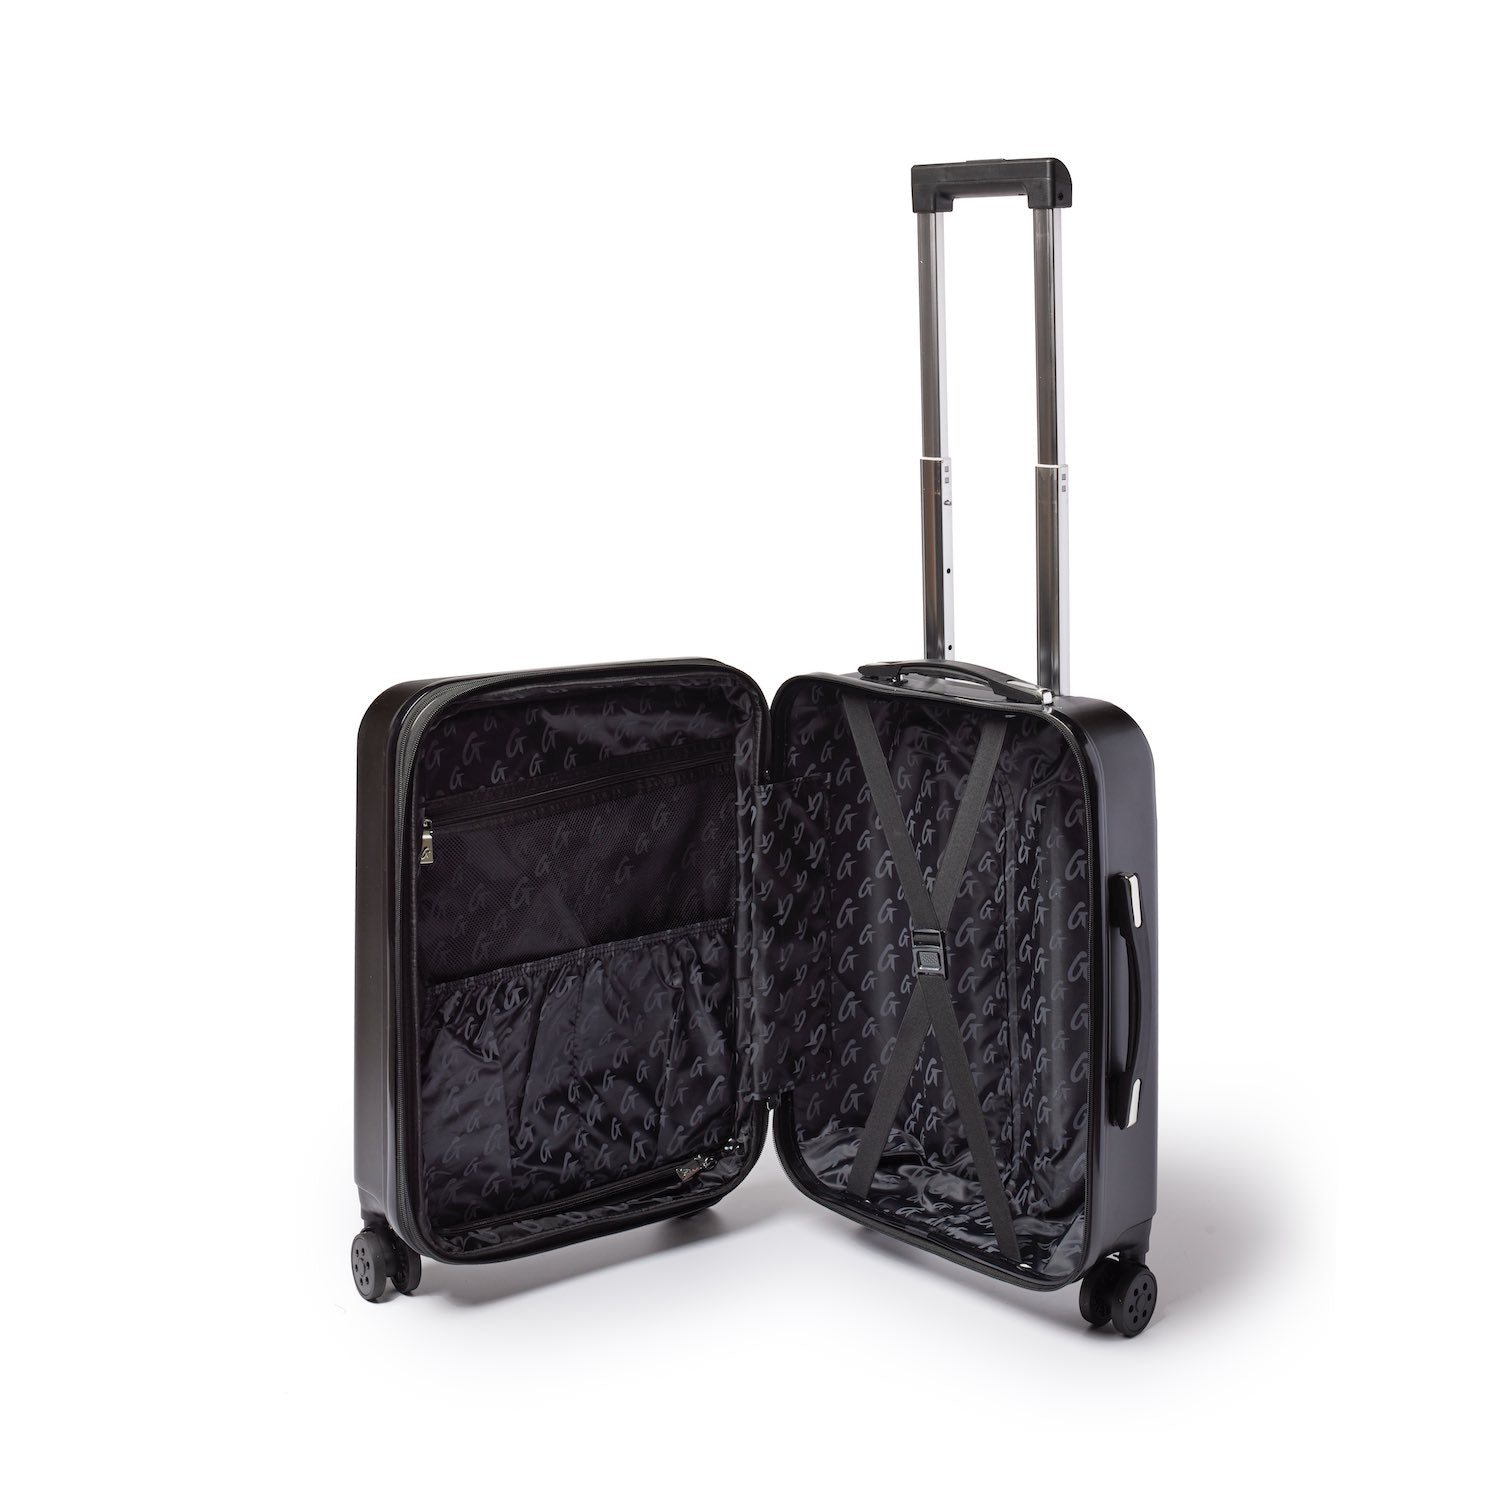 STANDARD CARRY-ON LUGGAGE BLACK